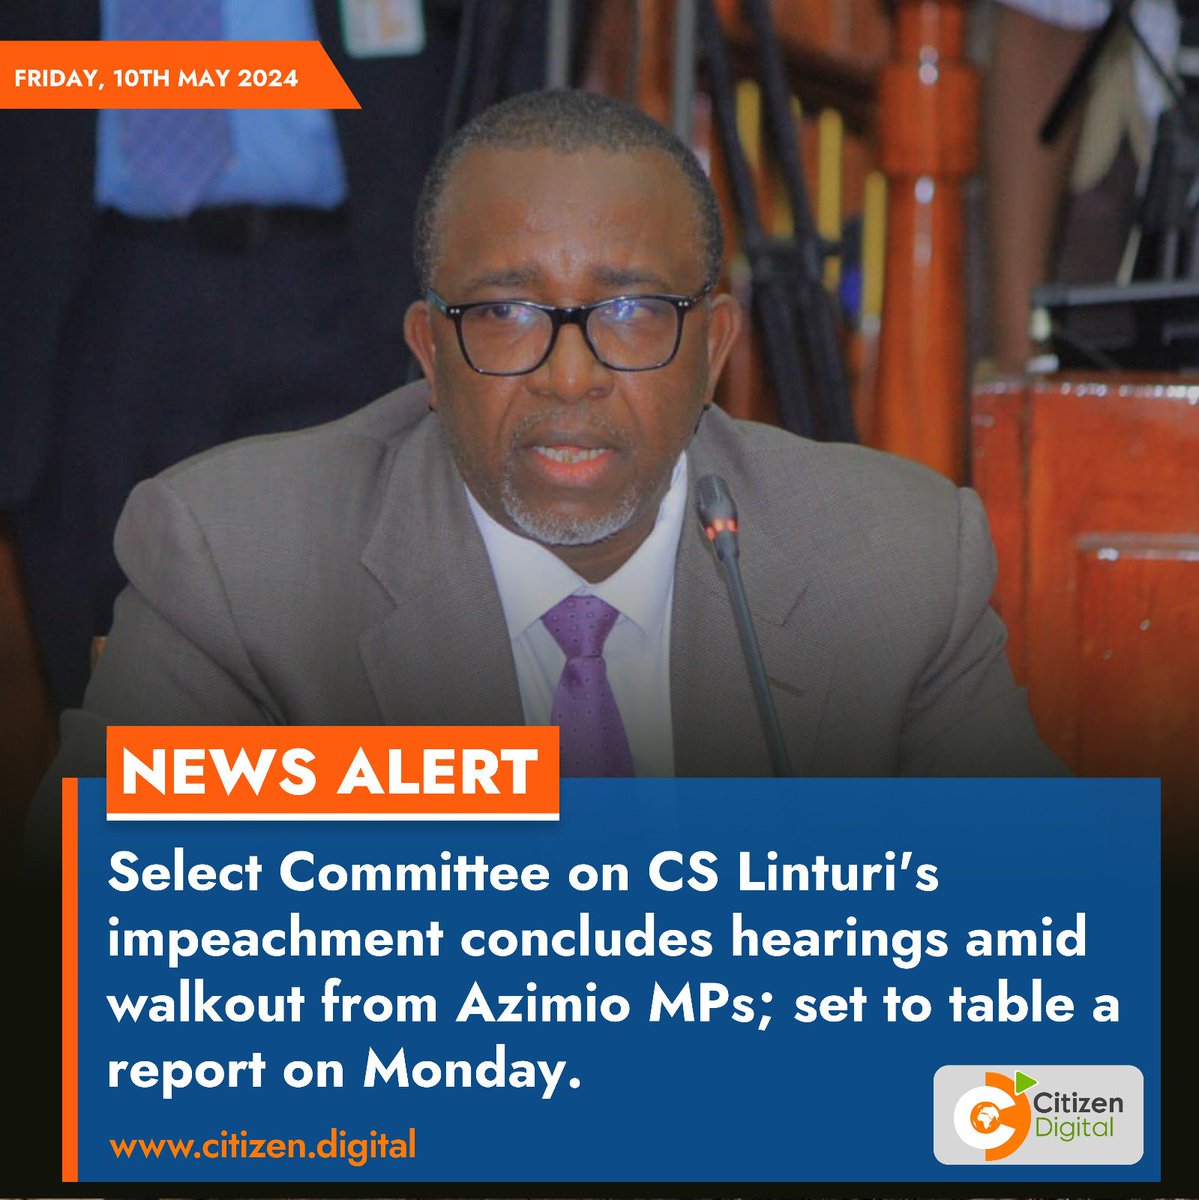 Select Committee on CS Linturi's impeachment concludes hearings amid walkout from Azimio MPs; set to table a report on Monday.